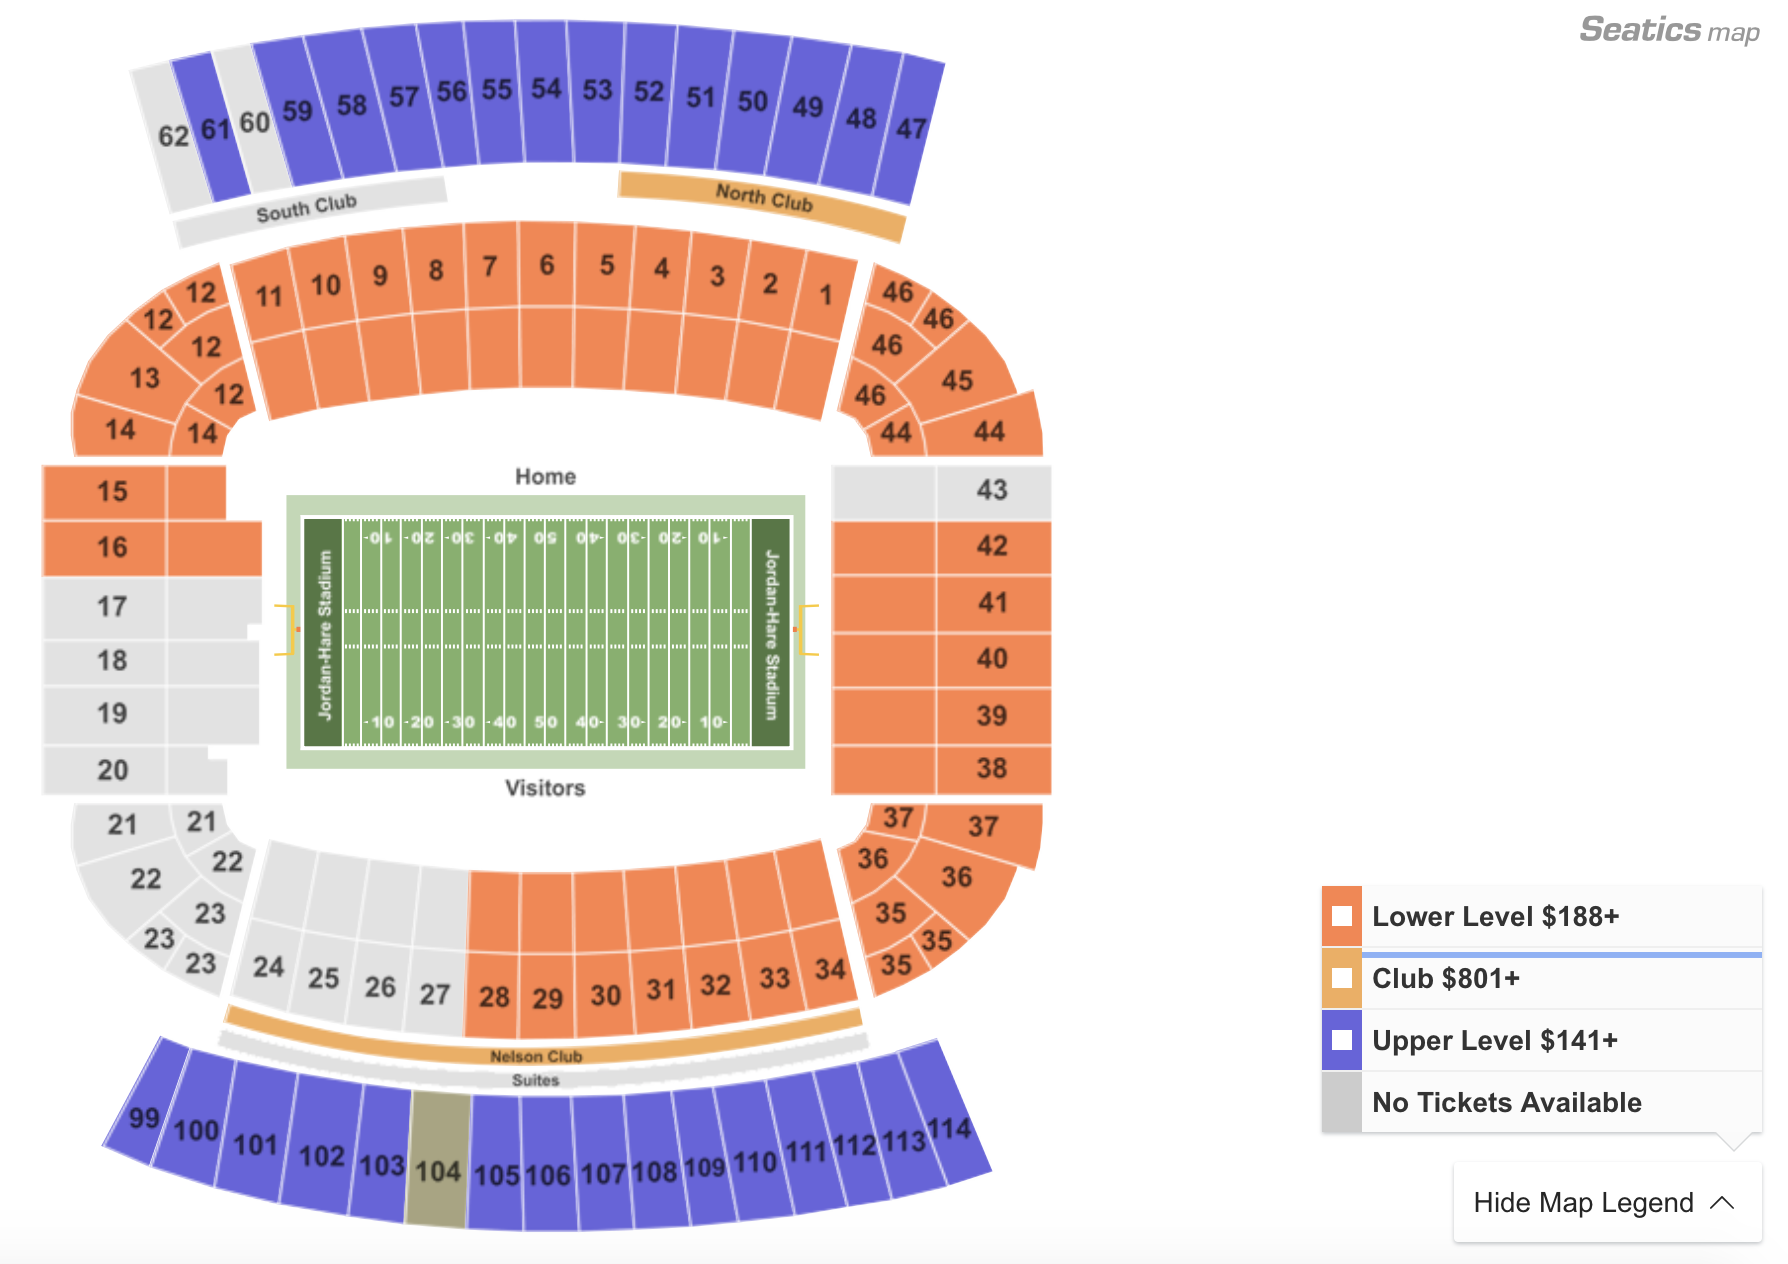 Where to find the cheapest Iron Bowl tickets on 11/30/19 in Auburn